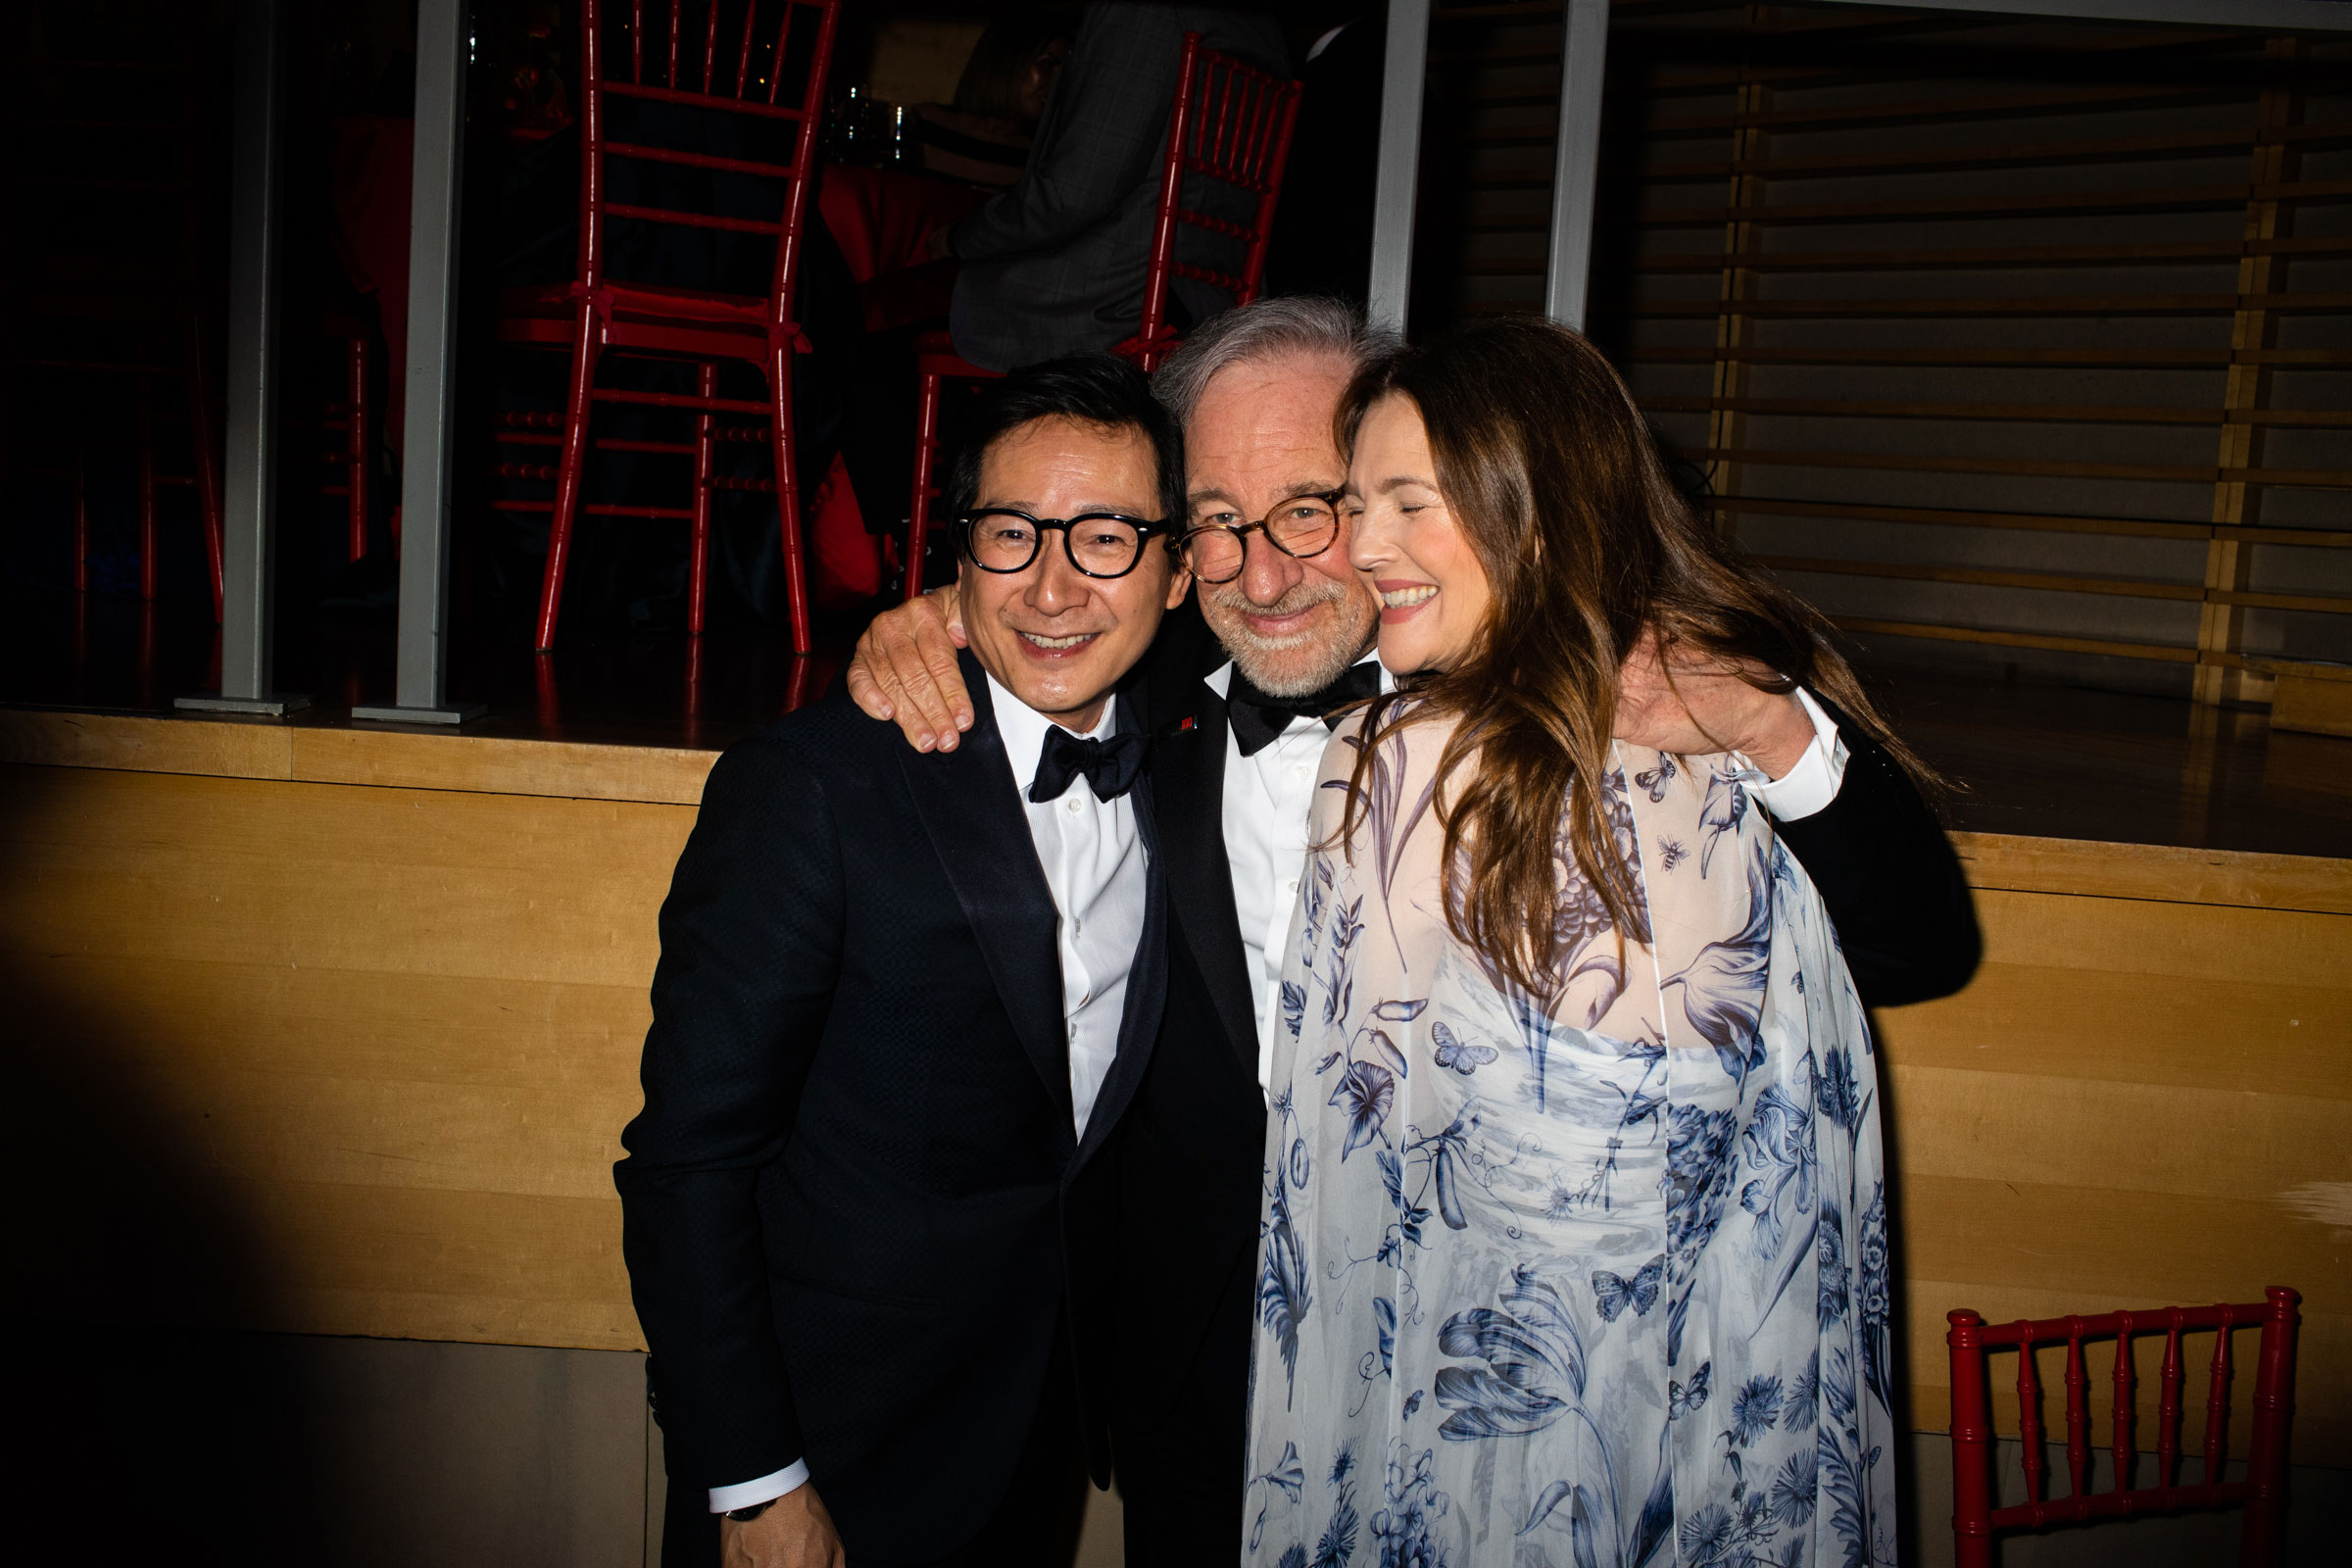 Ke Huy Quan, Steven Spielberg, and Drew Barrymore embrace during the TIME 100 Gala at Jazz at Lincoln Center in New York City, on April 26, 2023. (Landon Nordeman for TIME)